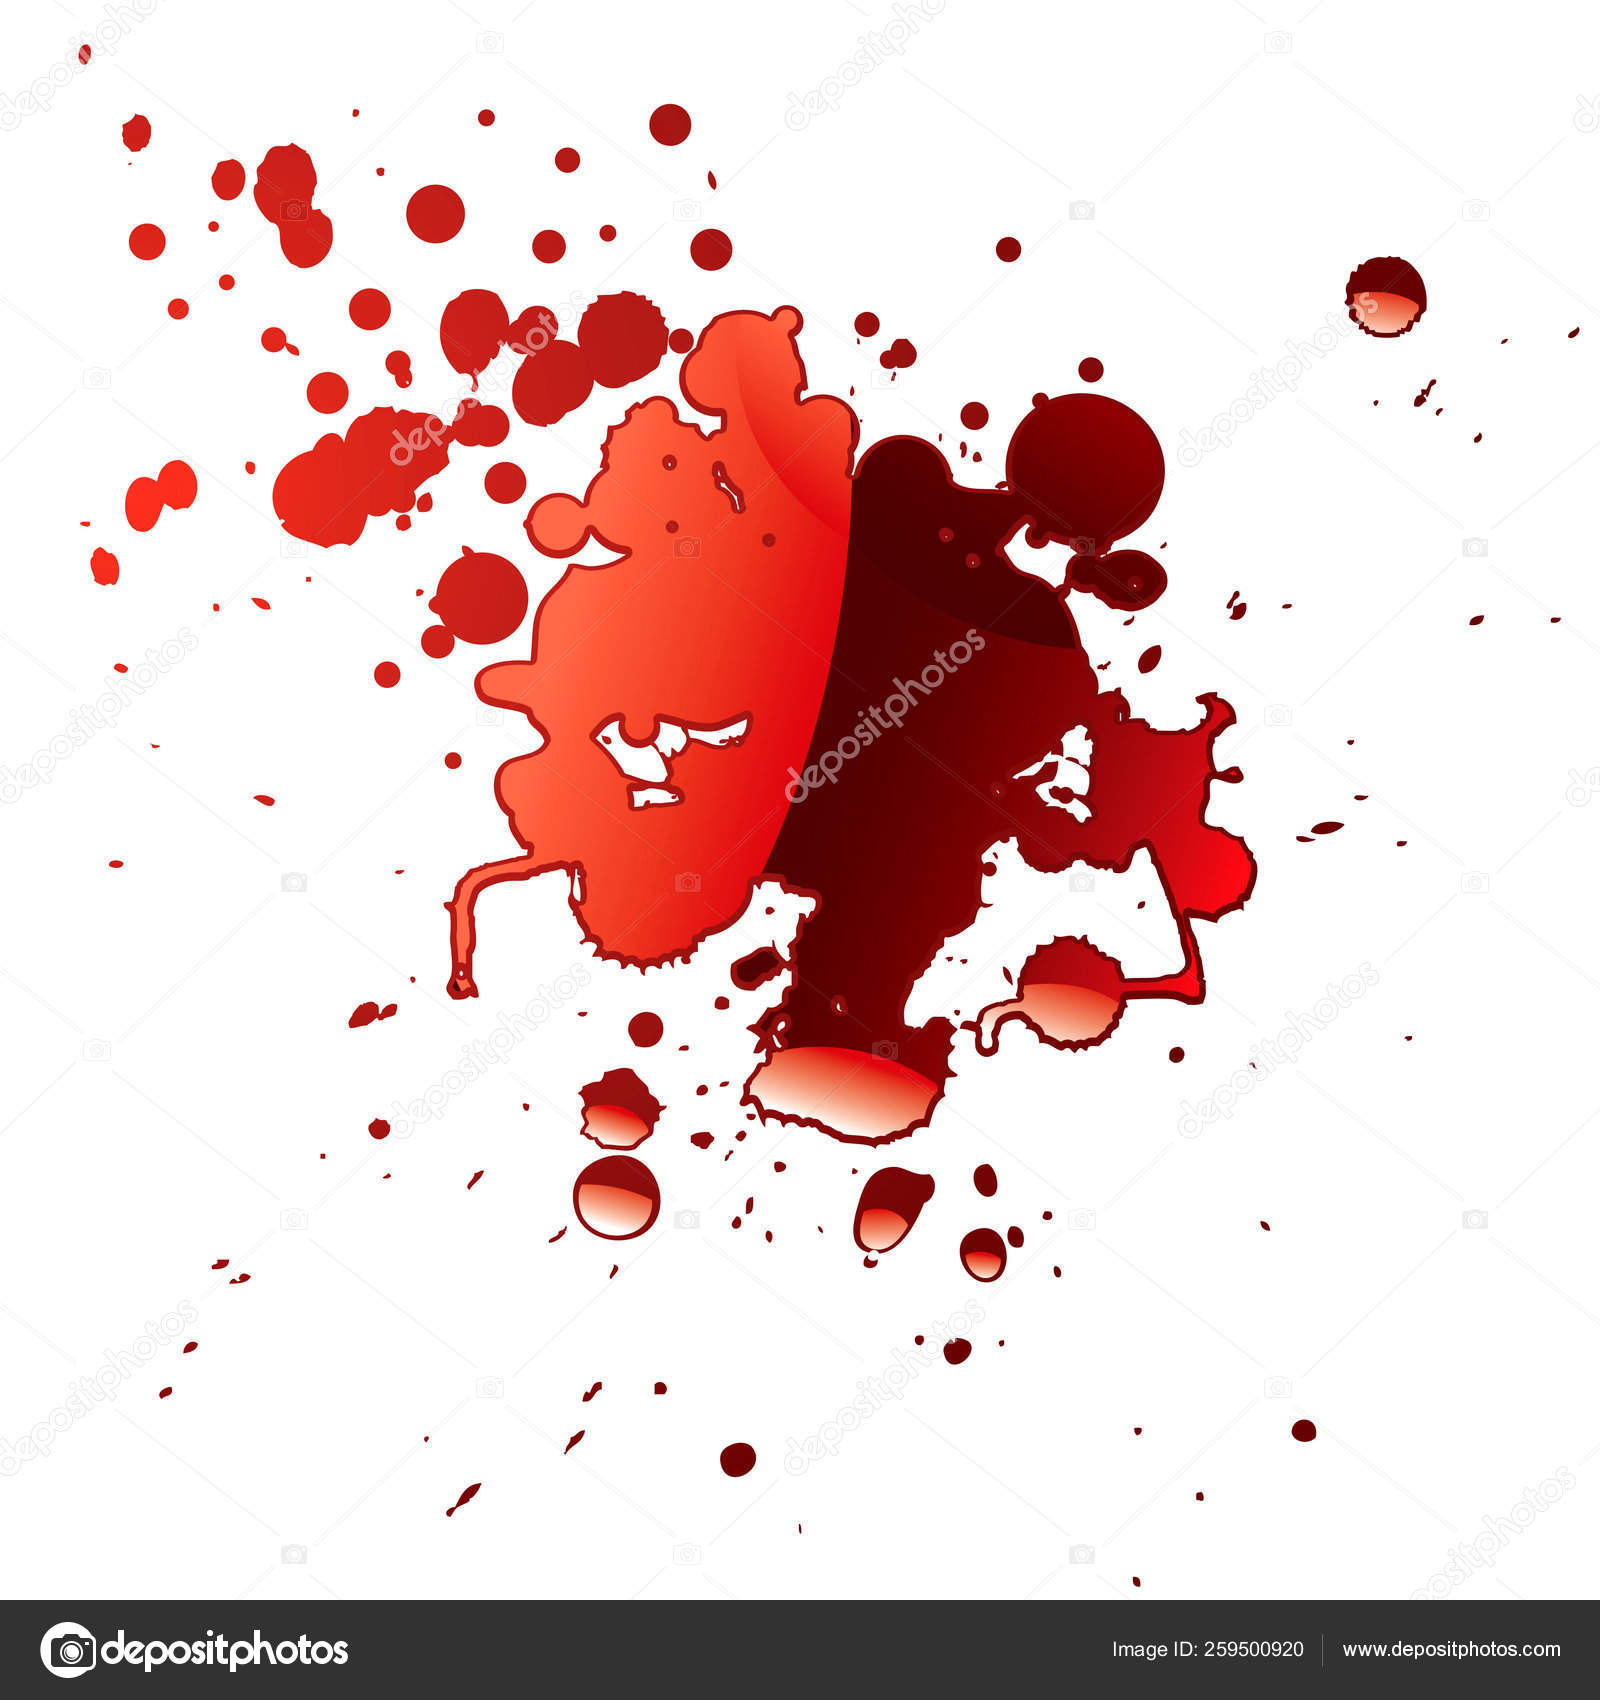 Pool Blood Red Fluid Light Reflection Splatter Stock Photo by